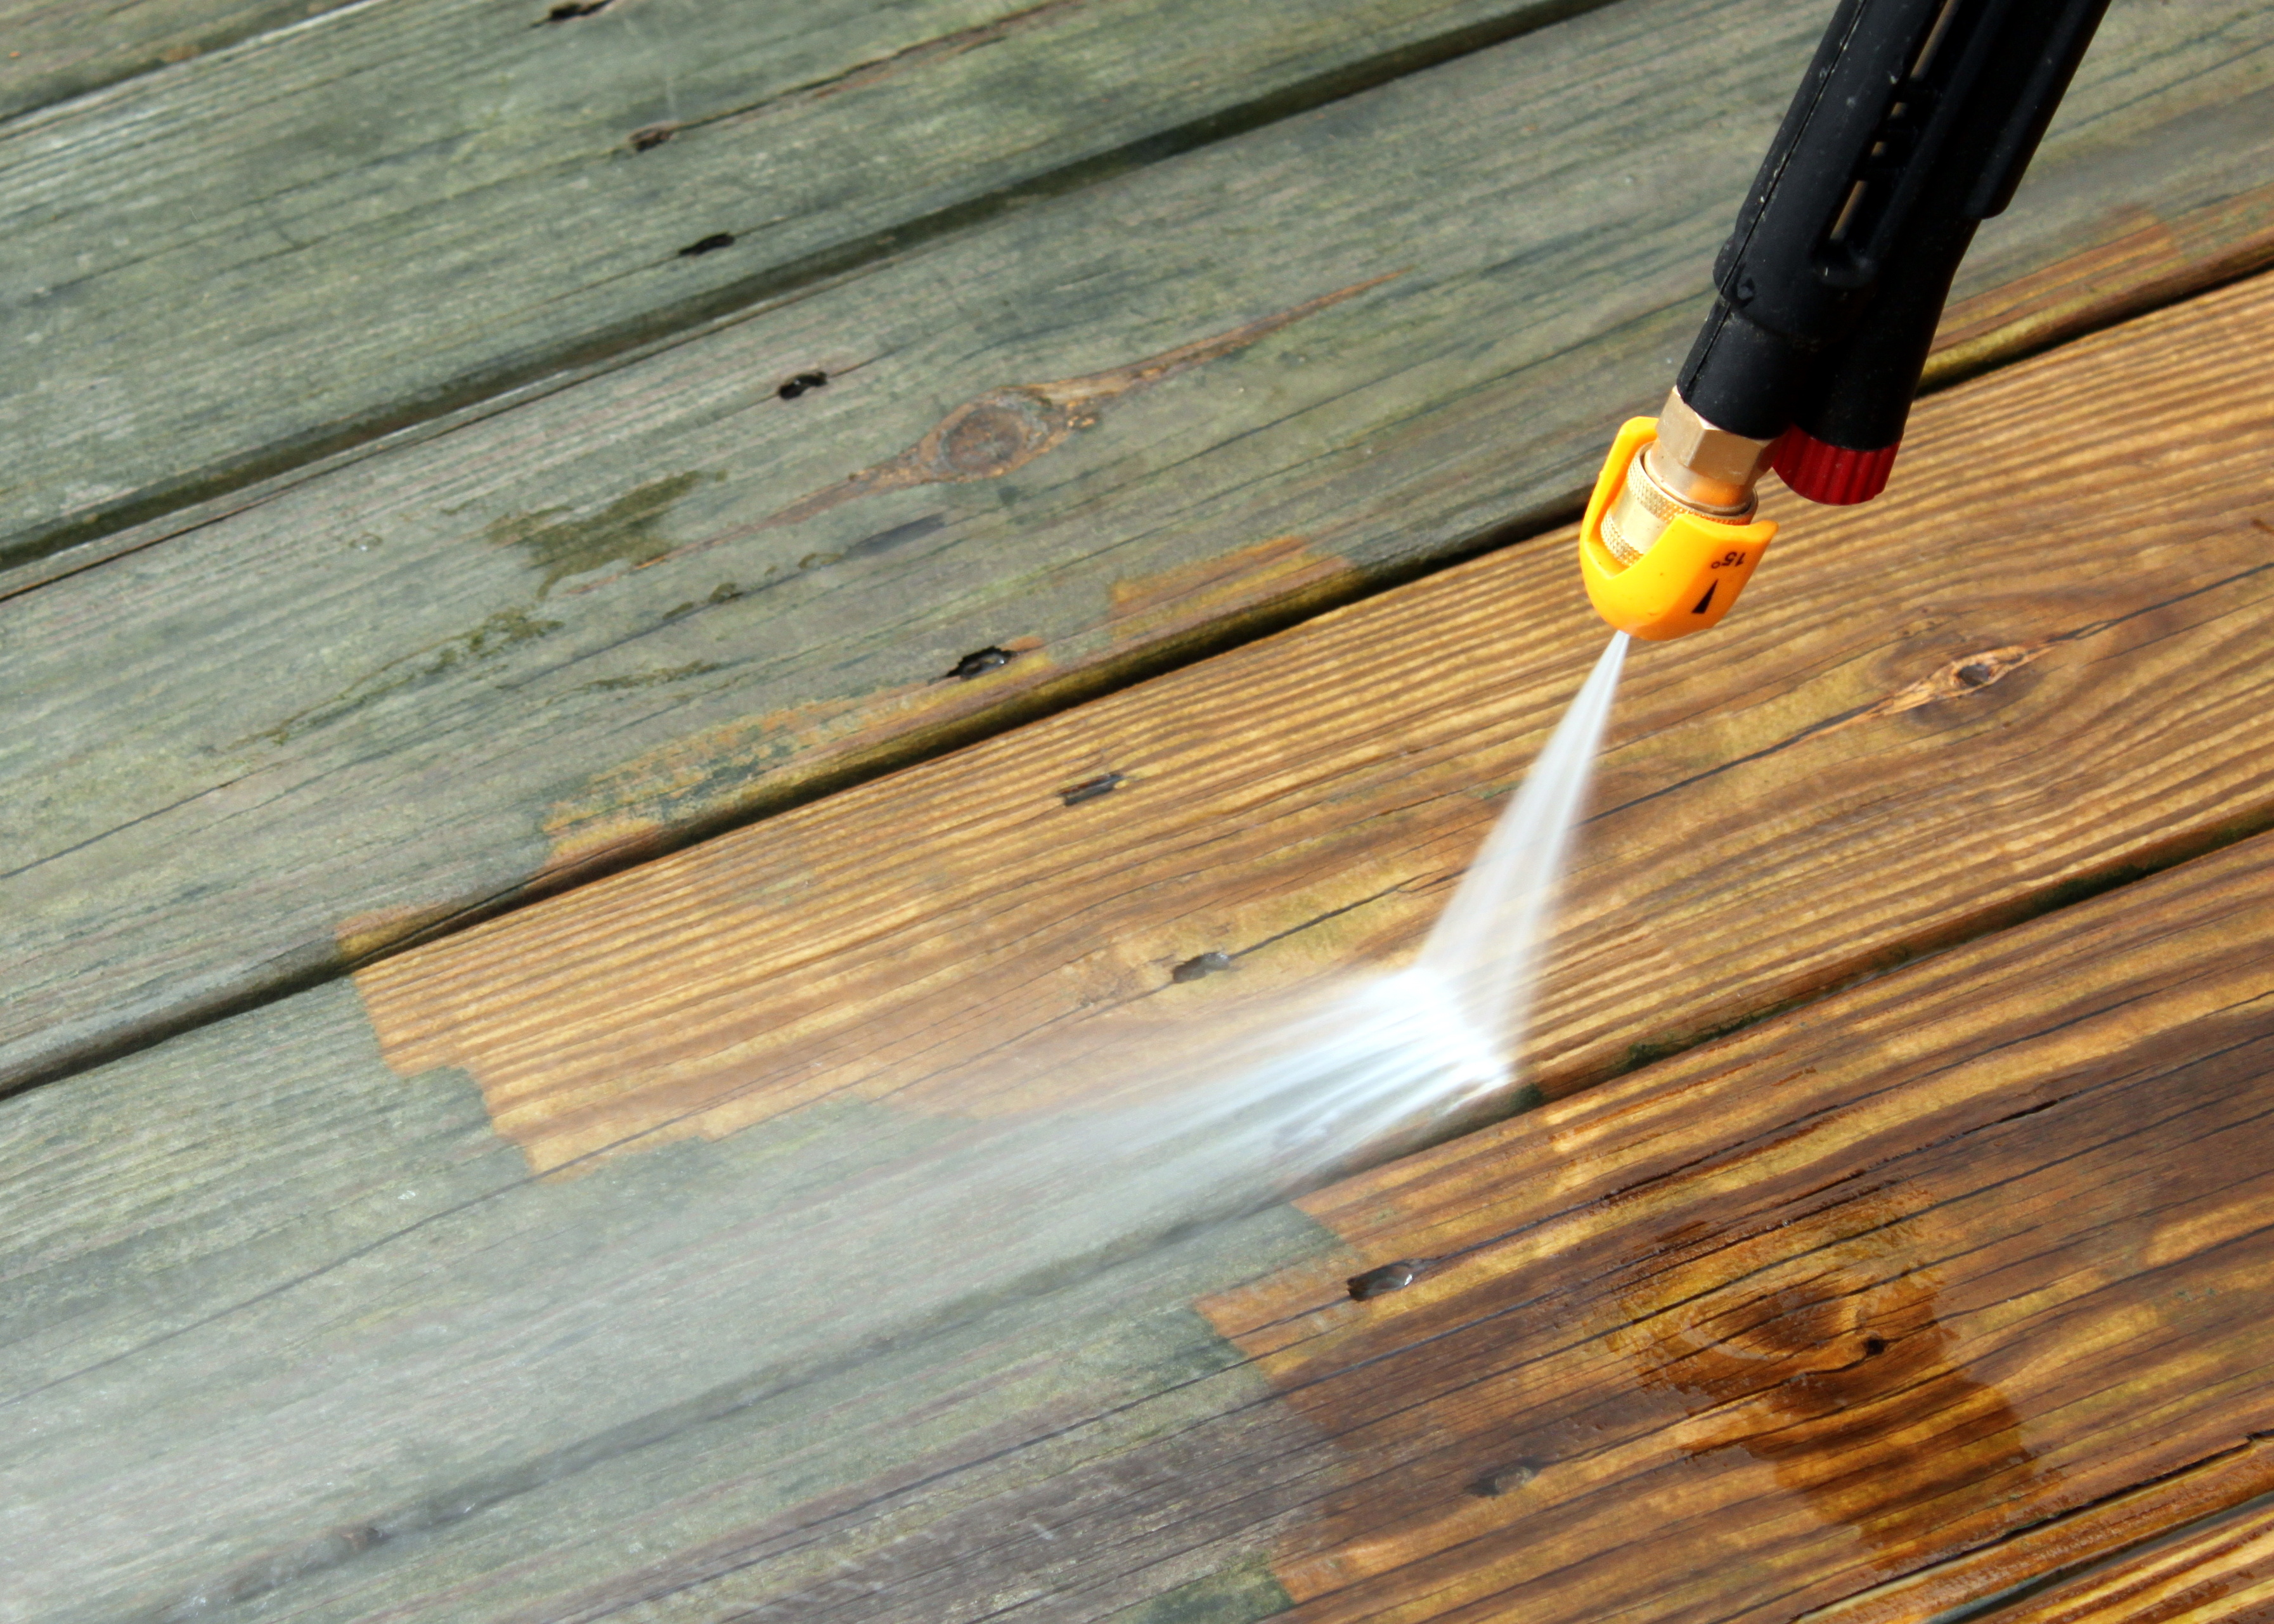 Patio Cleaning - Power wash